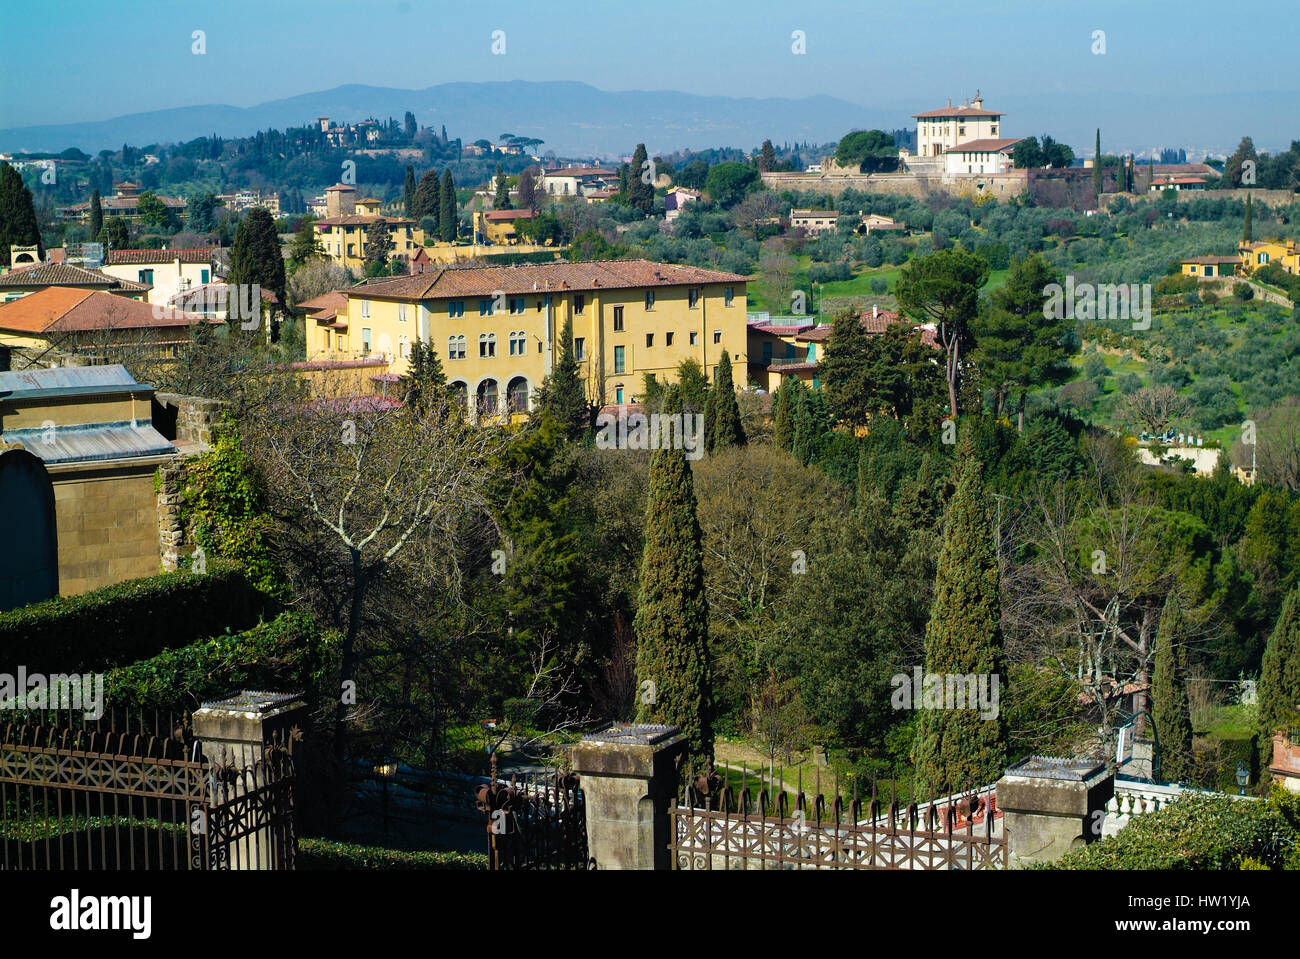 Forte BelVedere, Florence cityscape as viewed from Piazzale Michelangelo, Italy. Stock Photo